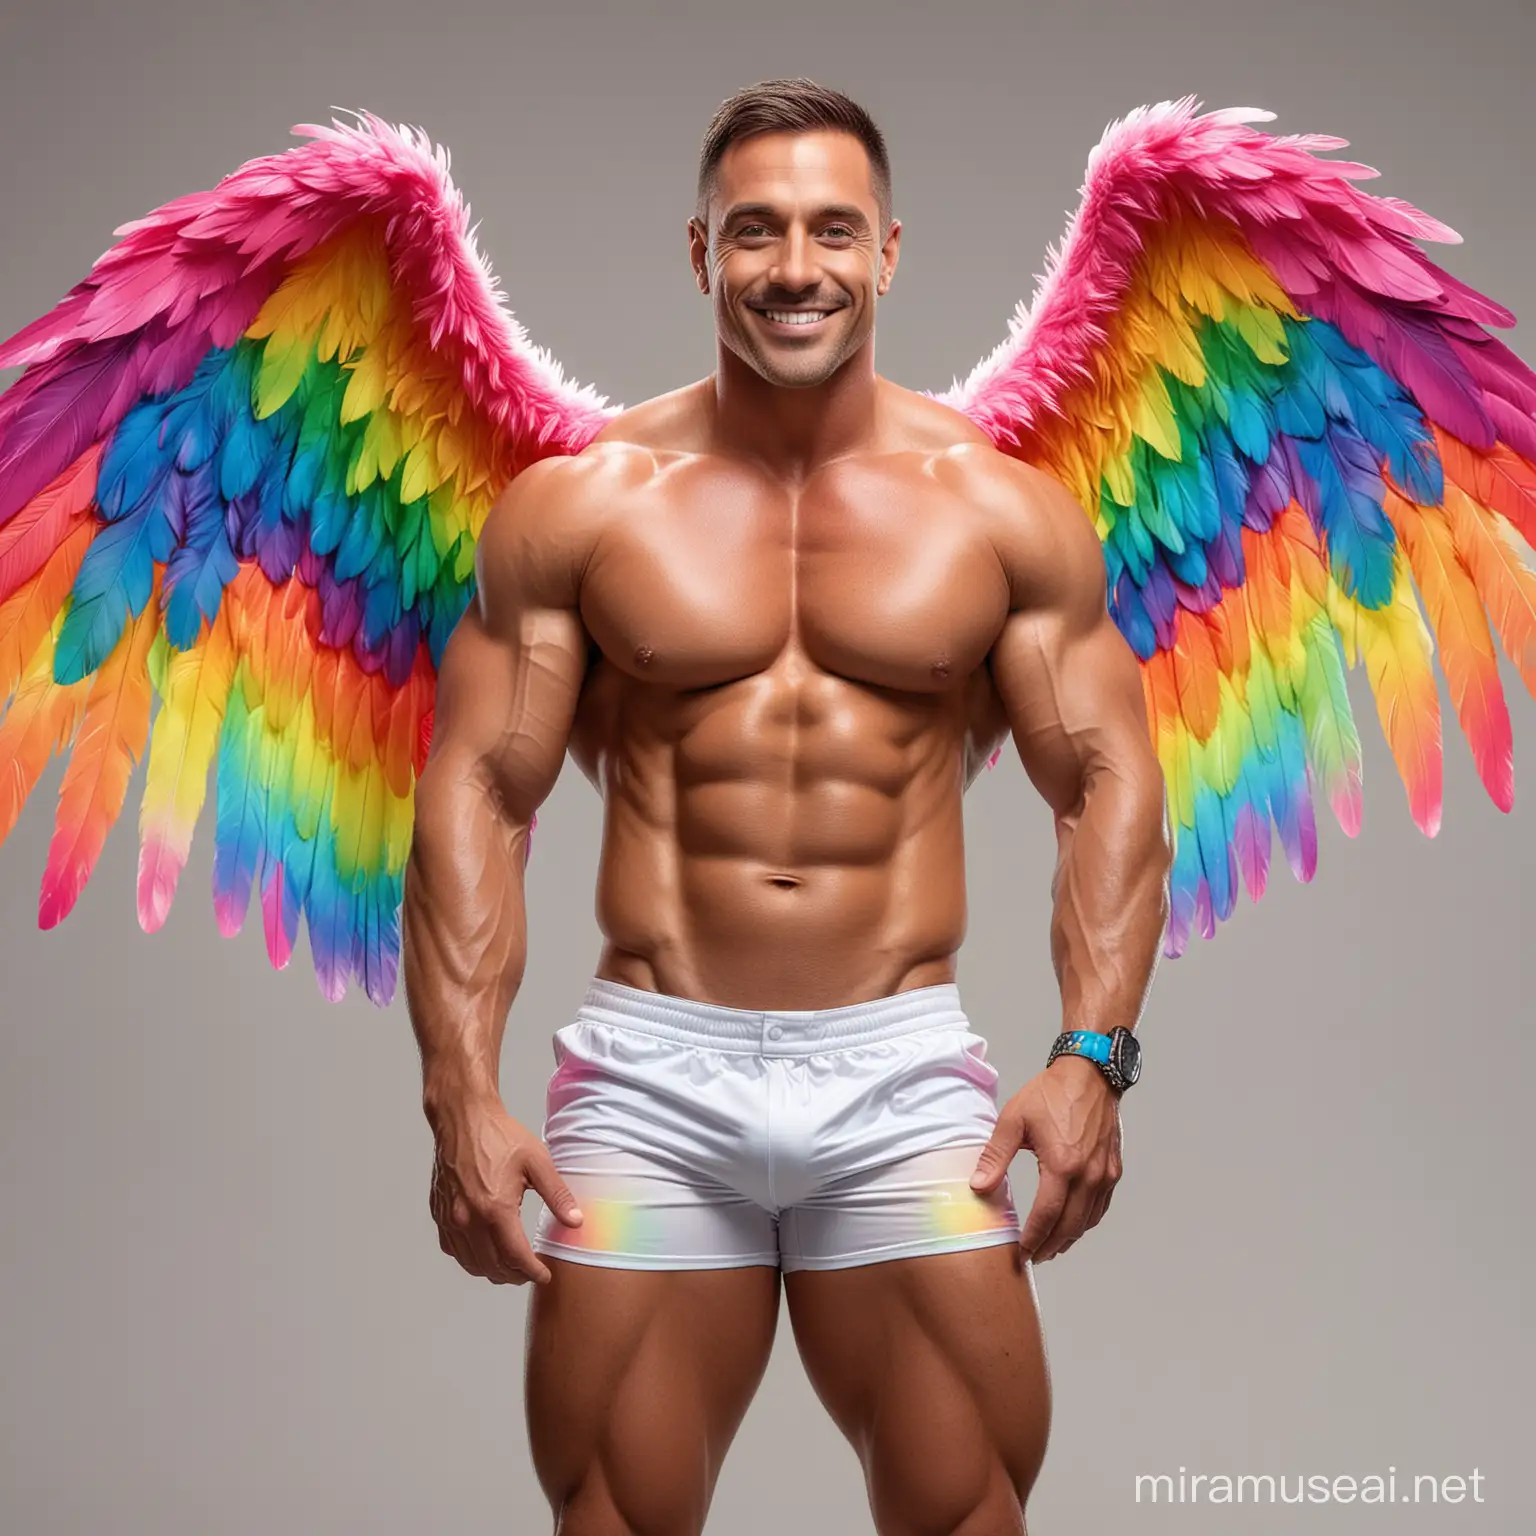 Ultra Chunky Bodybuilder Flexing in Rainbow LED Jacket with Eagle Wings